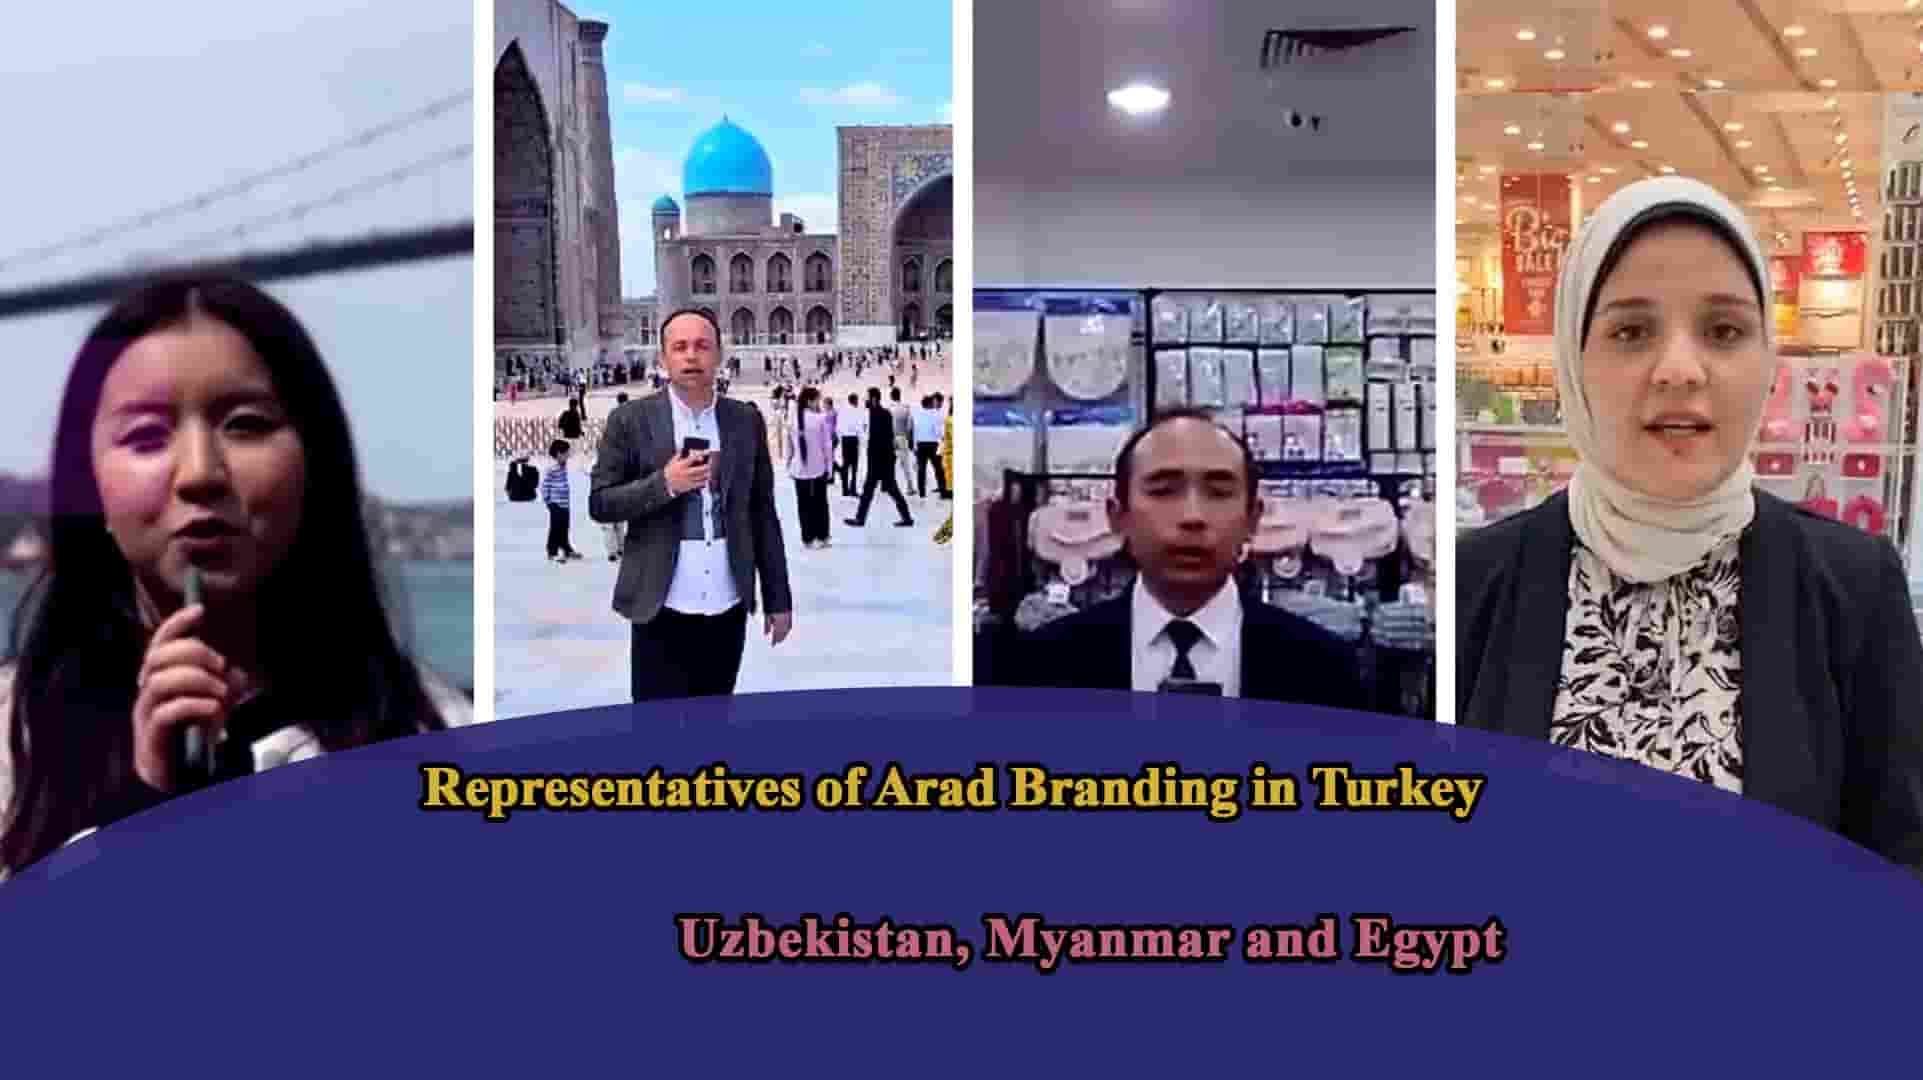 Arad Branding's foreign representatives in Uzbekistan, Myanmar, Egypt and Turkey and the communication of Aradi merchants with them